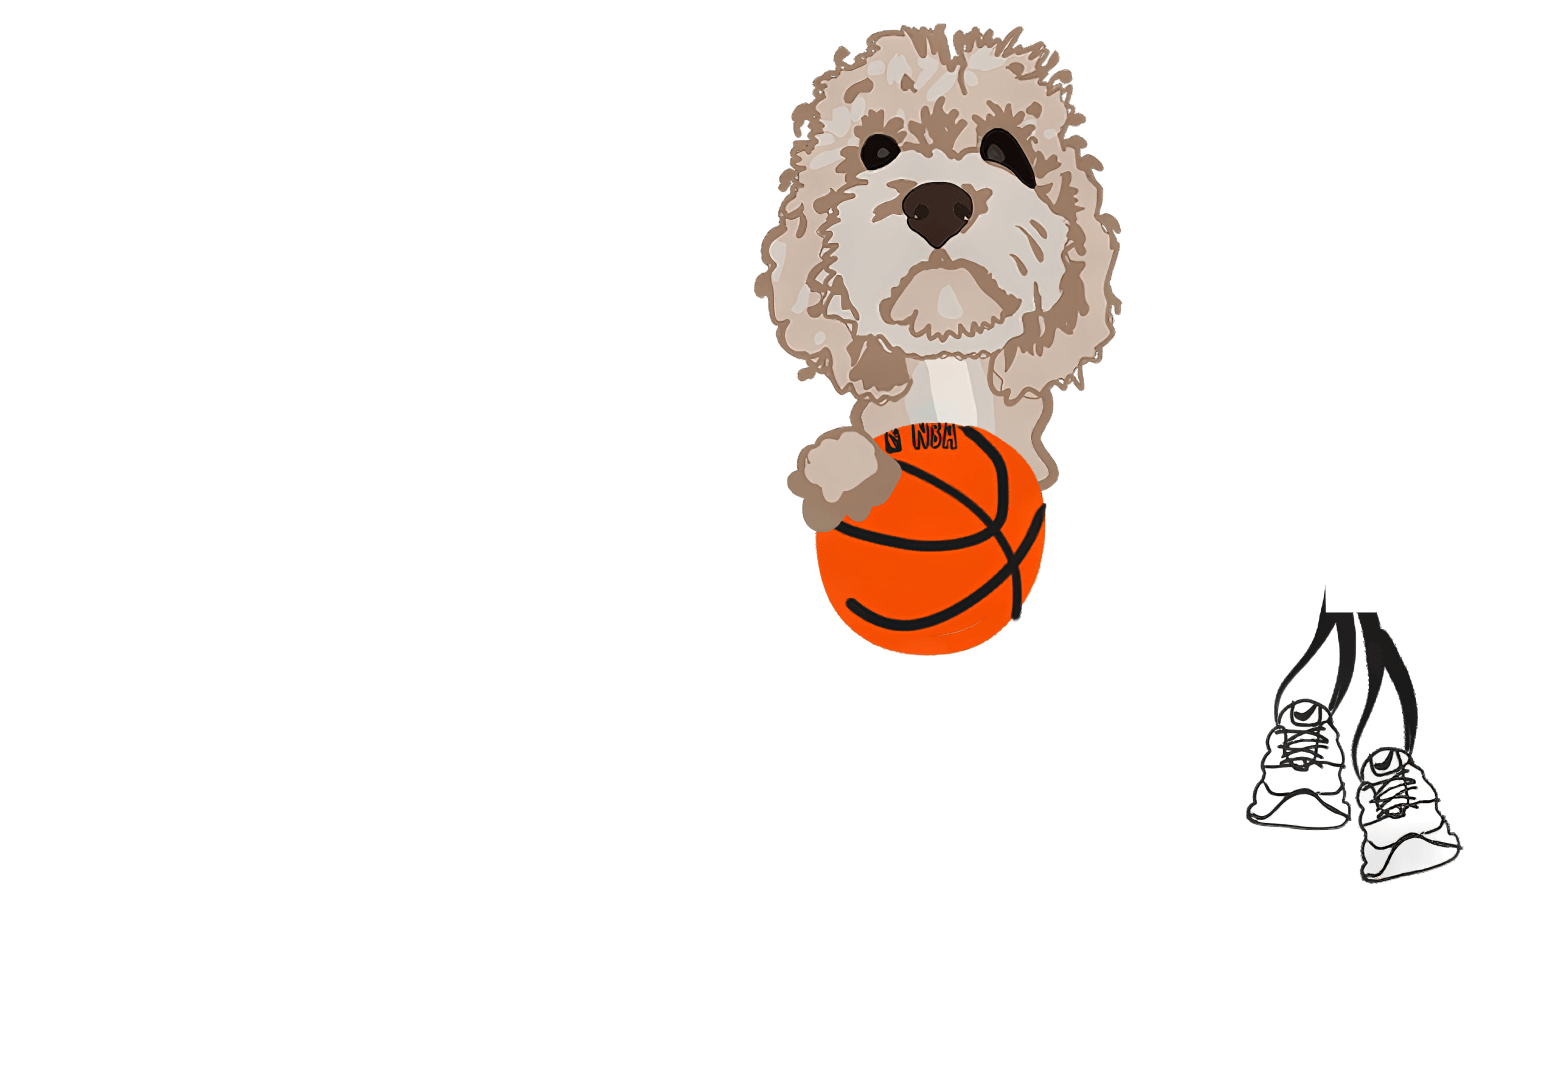 victory-by-you-05